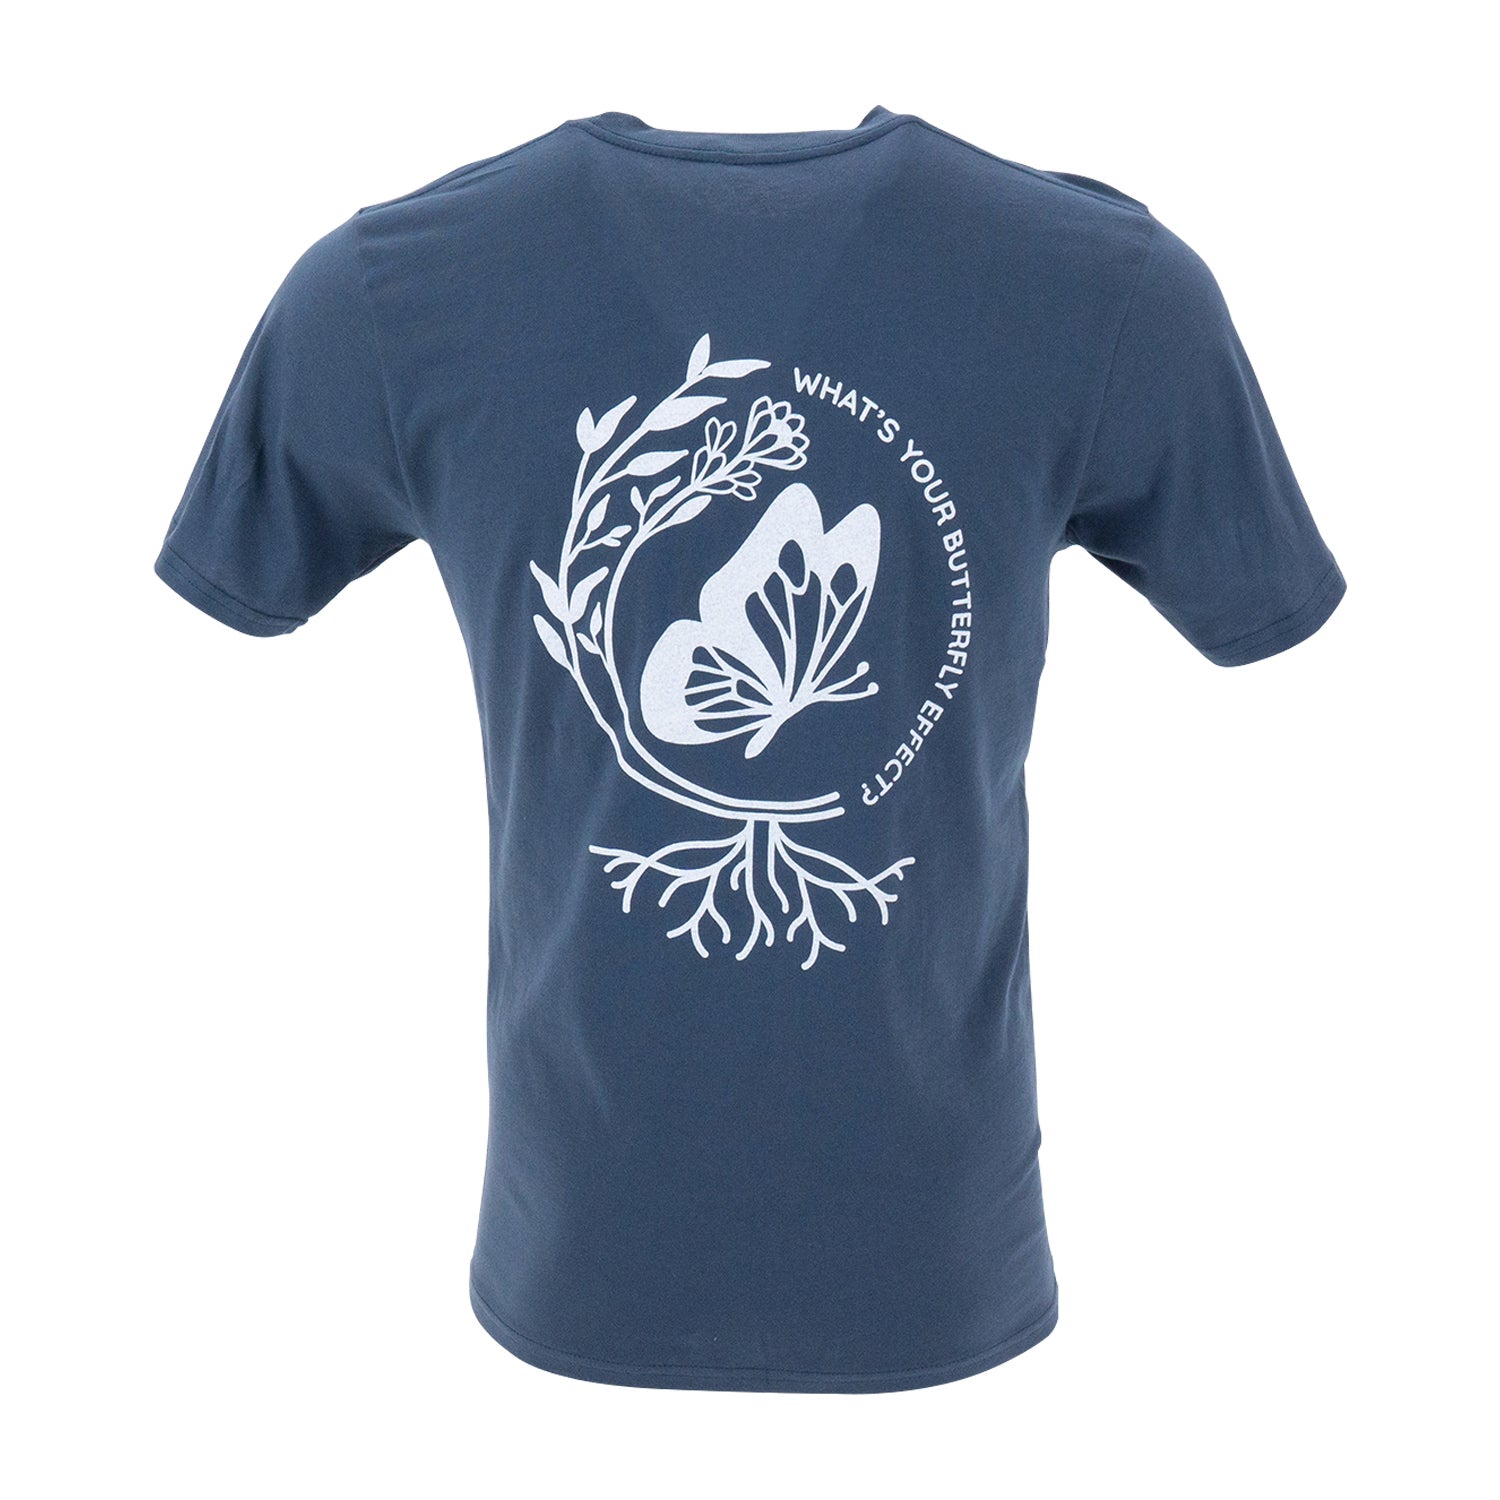 Non-GMO Project navy t-shirt back with illustrations of leaves, roots, butterfly and the quote "What's your butterfly effect?"